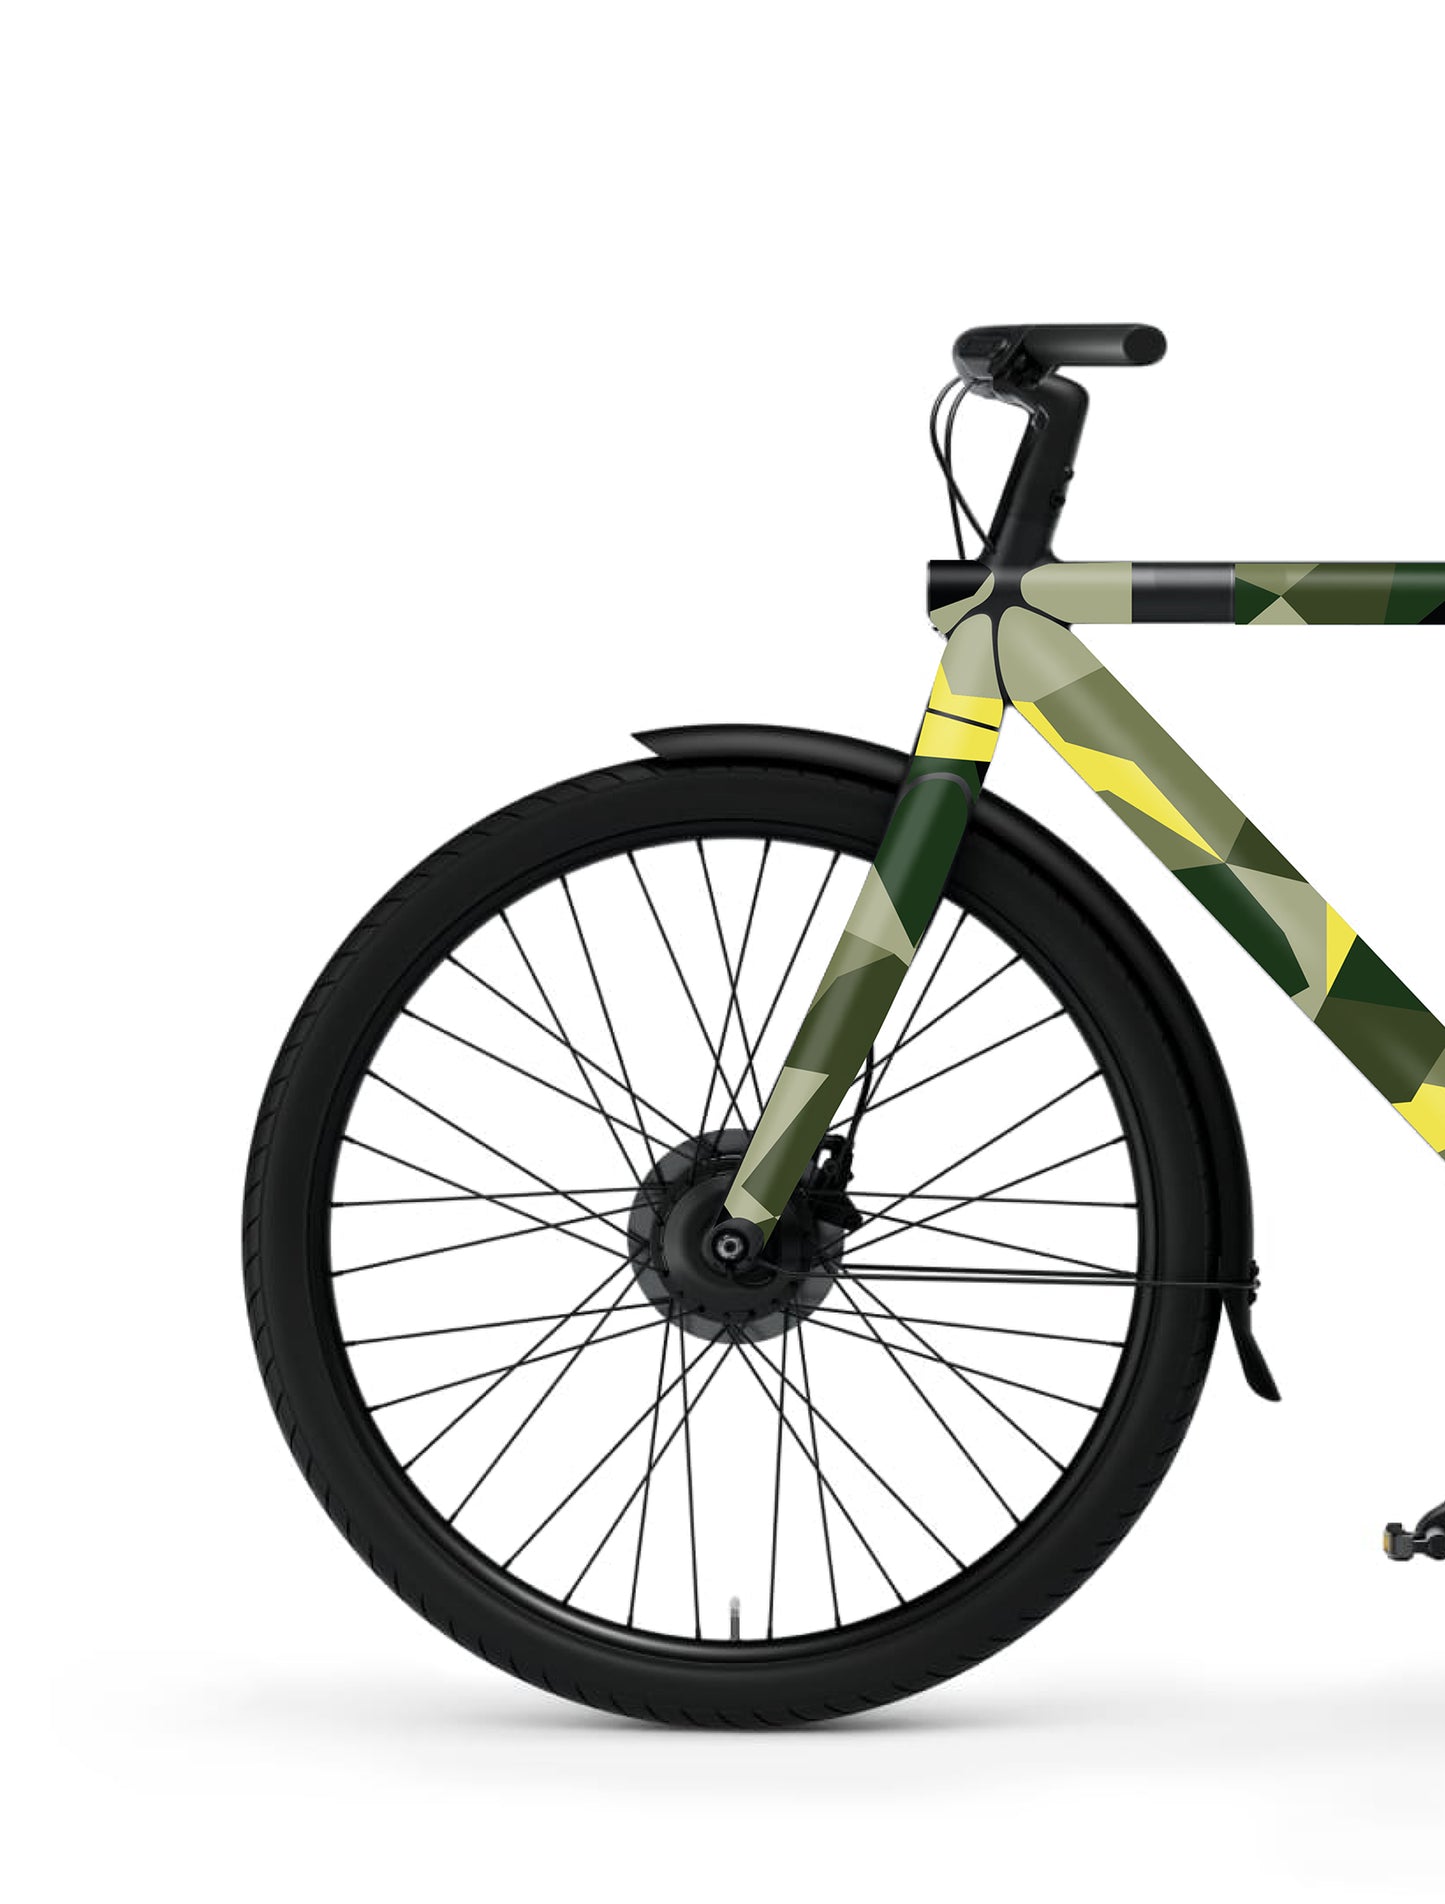 GREEN CAMO PROTECT KIT FOR VANMOOF S2/S3